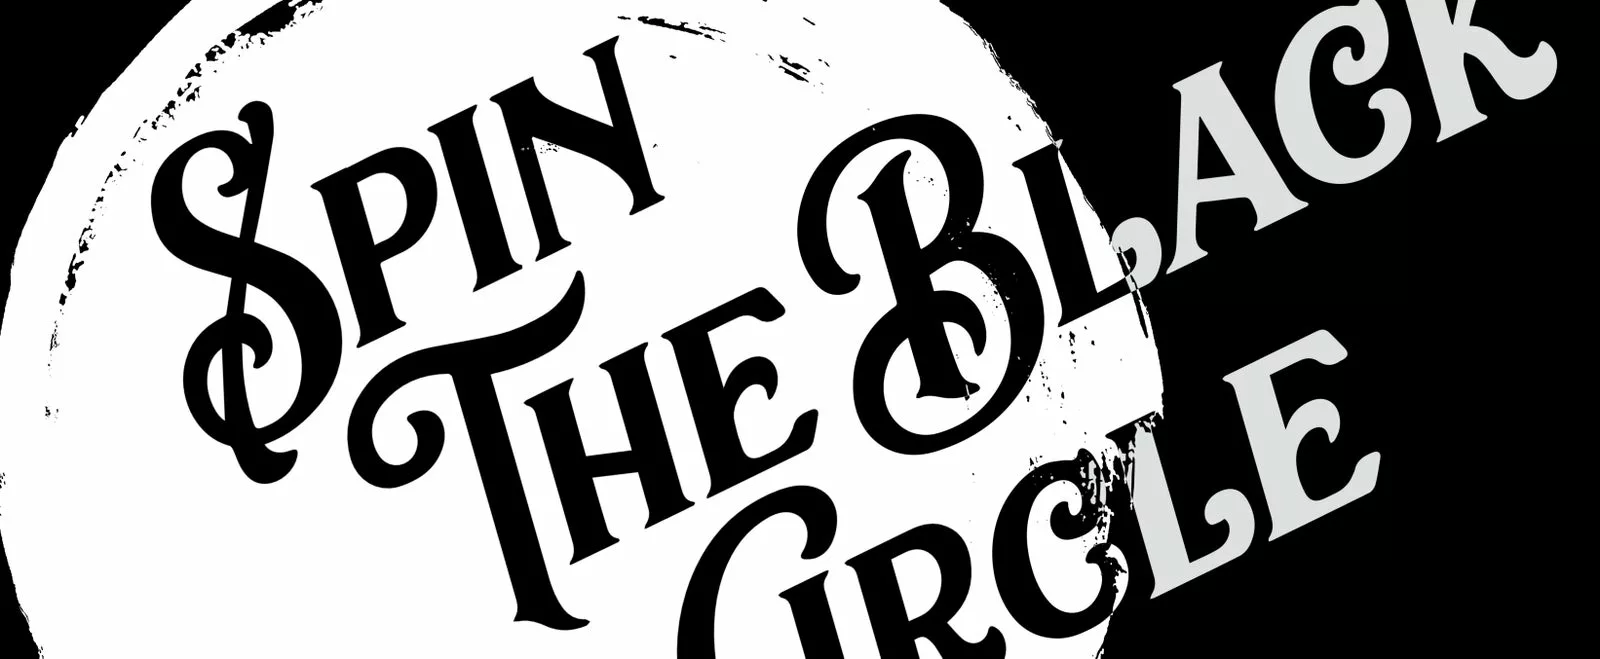 Spin the Black Circle. Malvern Rocks Gig Guide for Music in Malvern. Gigs, concerts, live music, open mic nights. Make Malvern your destination for music.